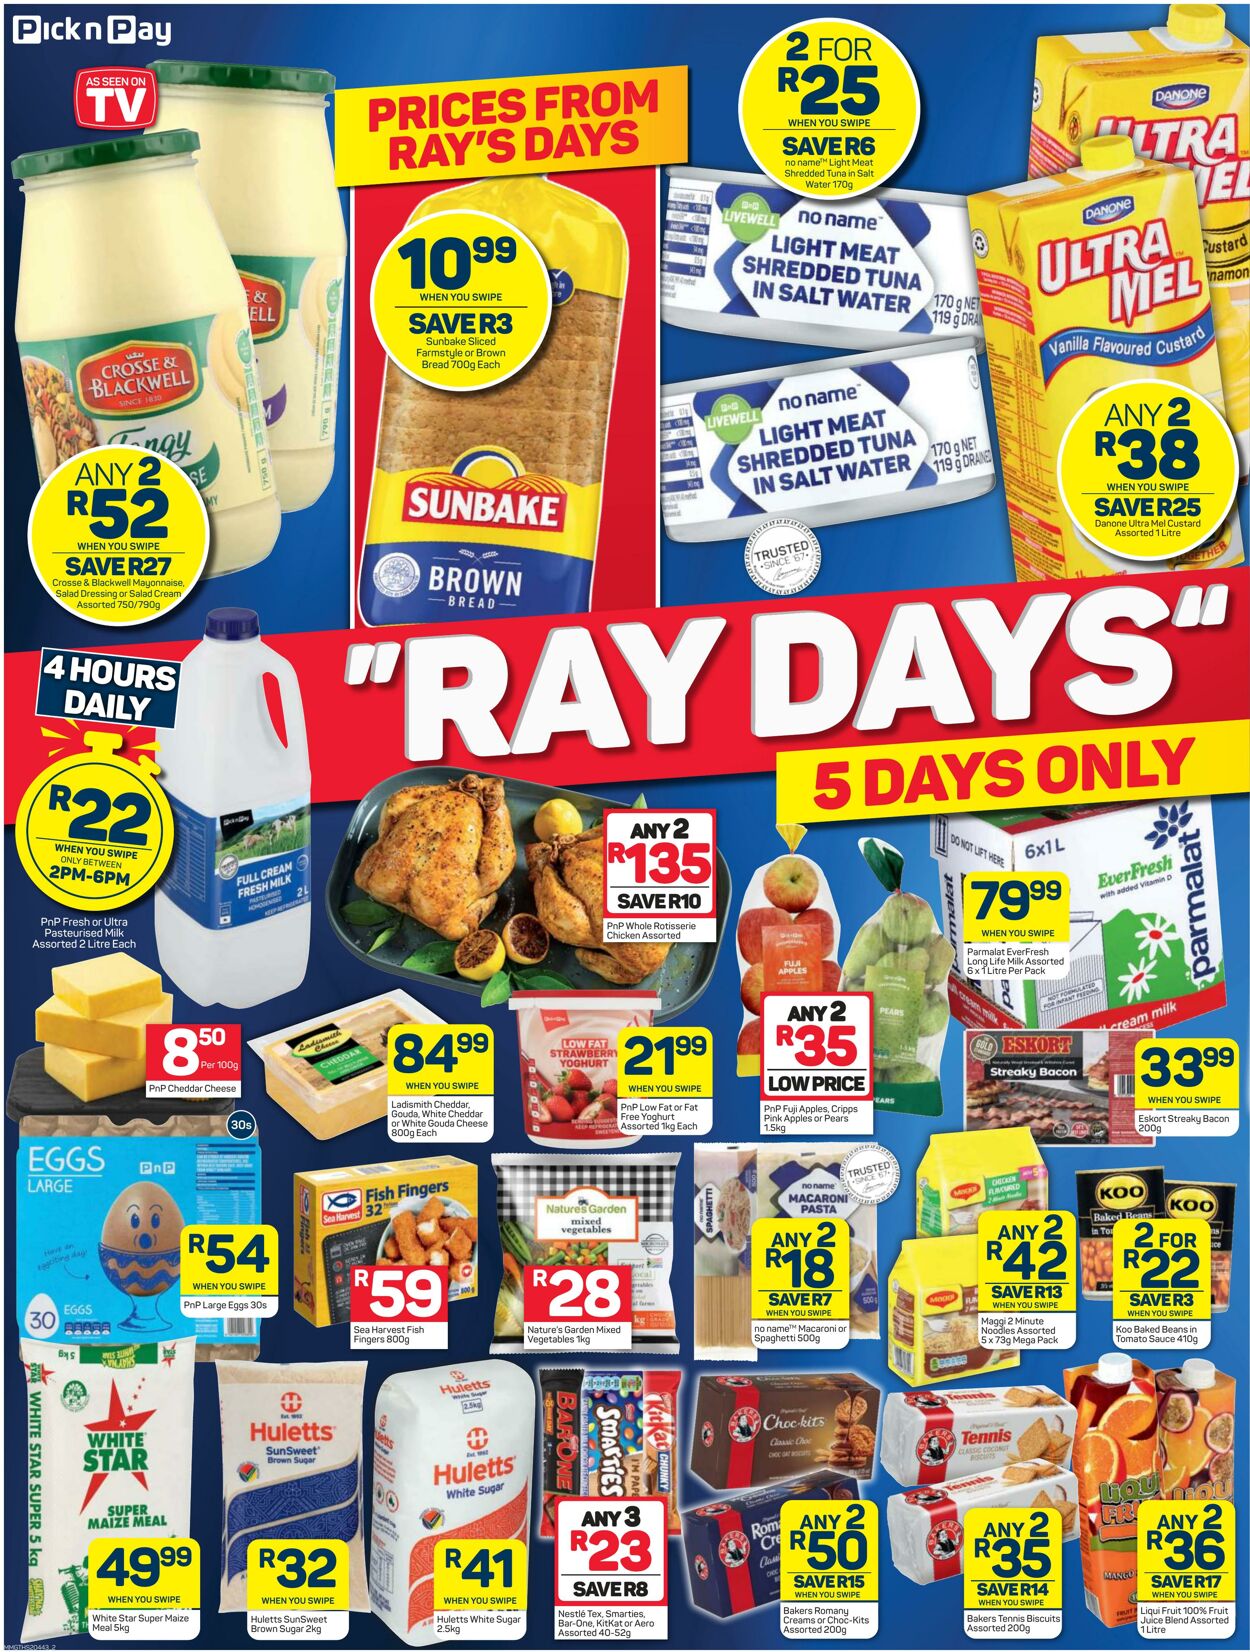 Special Pick n Pay 15.06.2022 - 19.06.2022